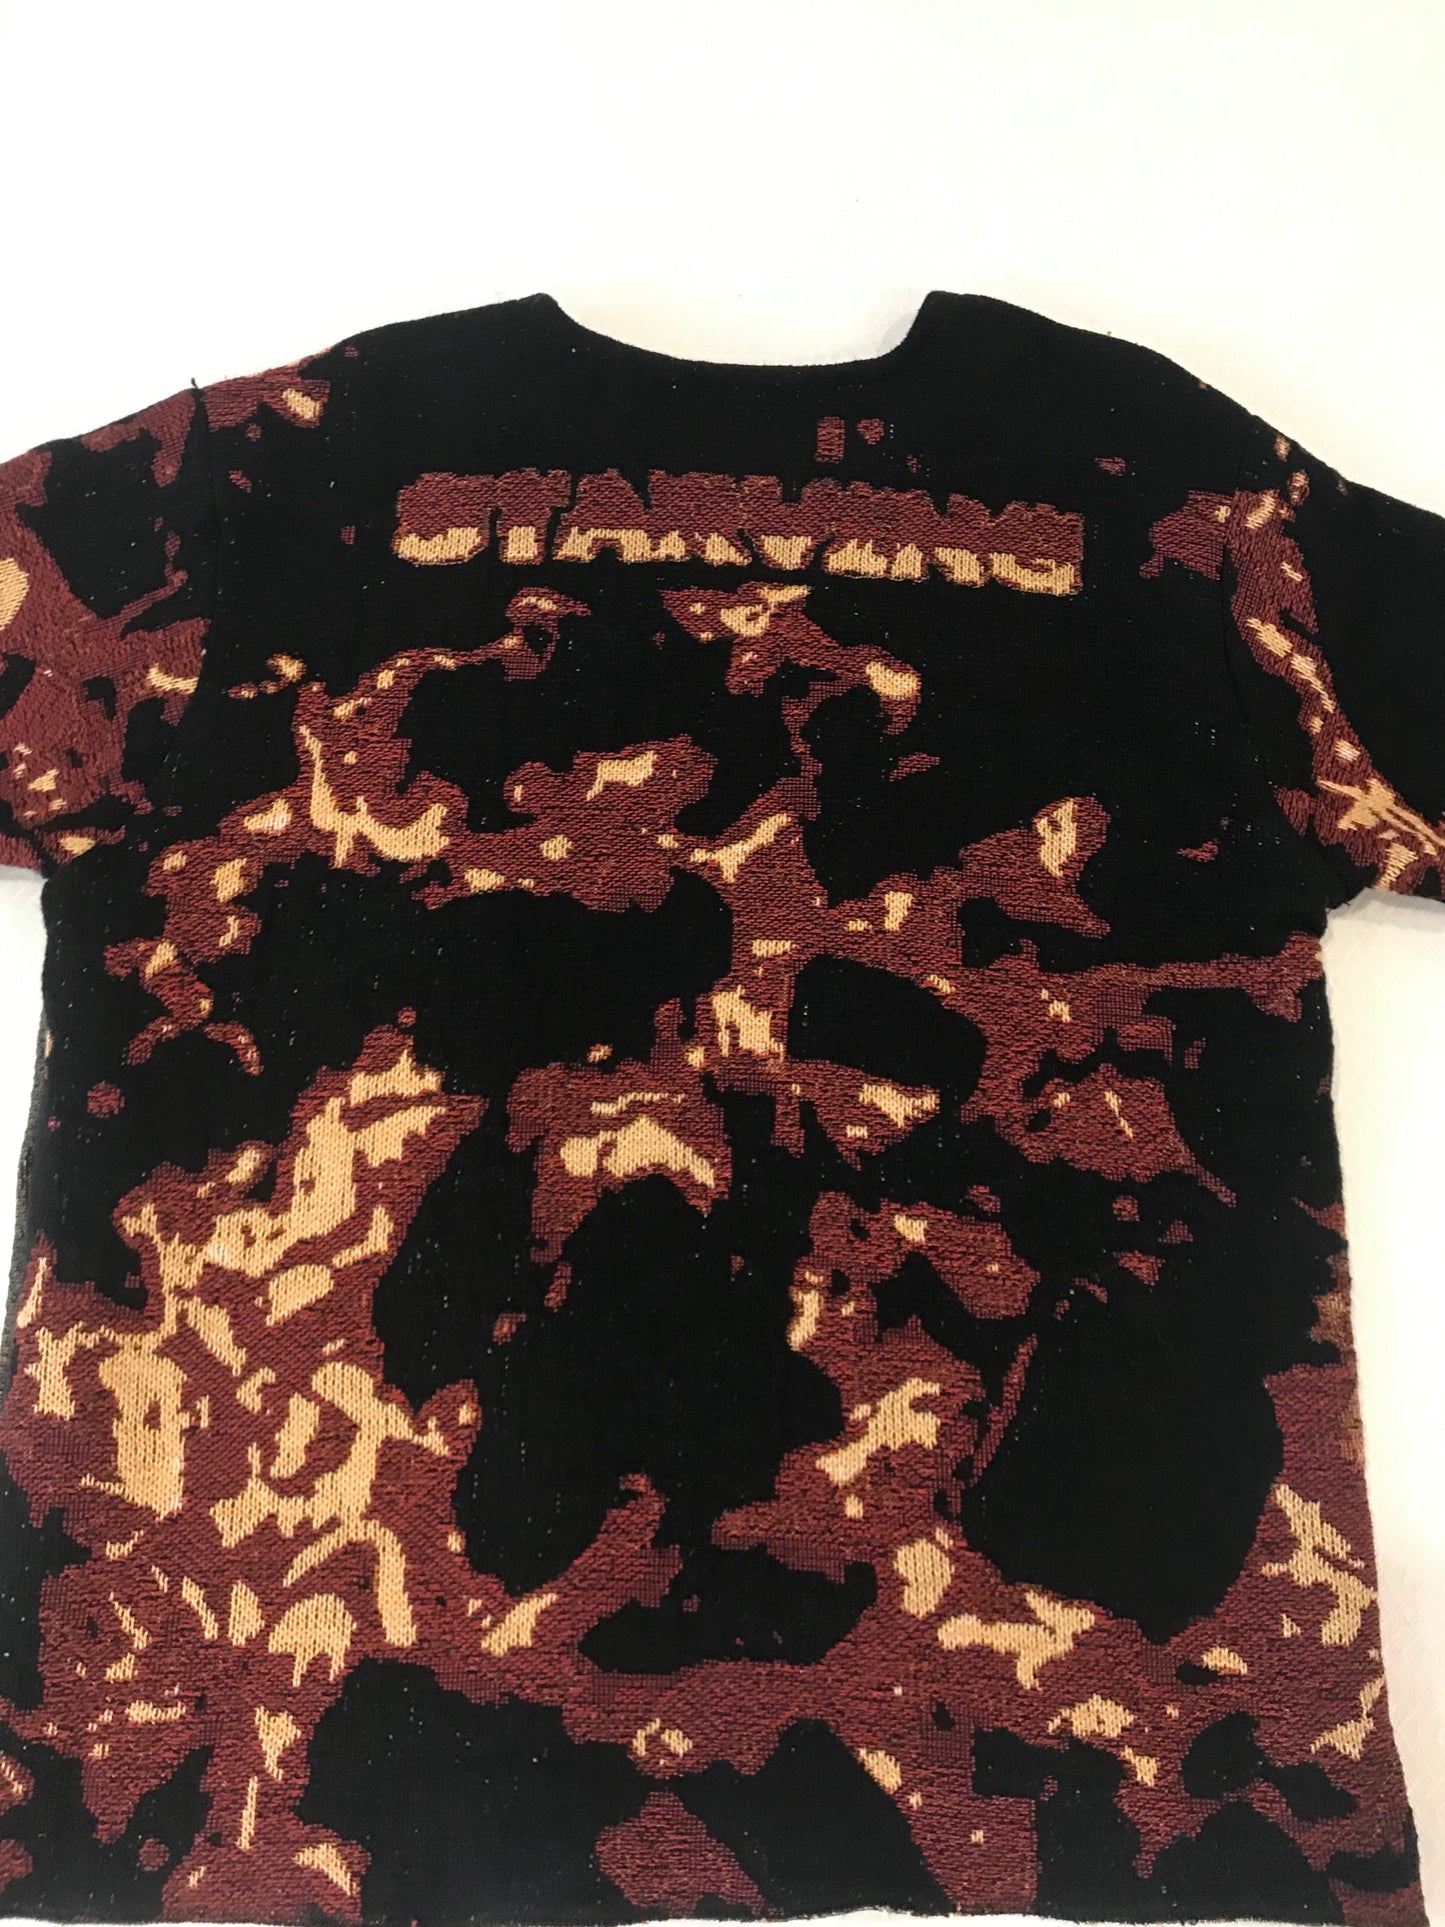 FATALITY Woven Tapestry Crewneck - Starving Brand